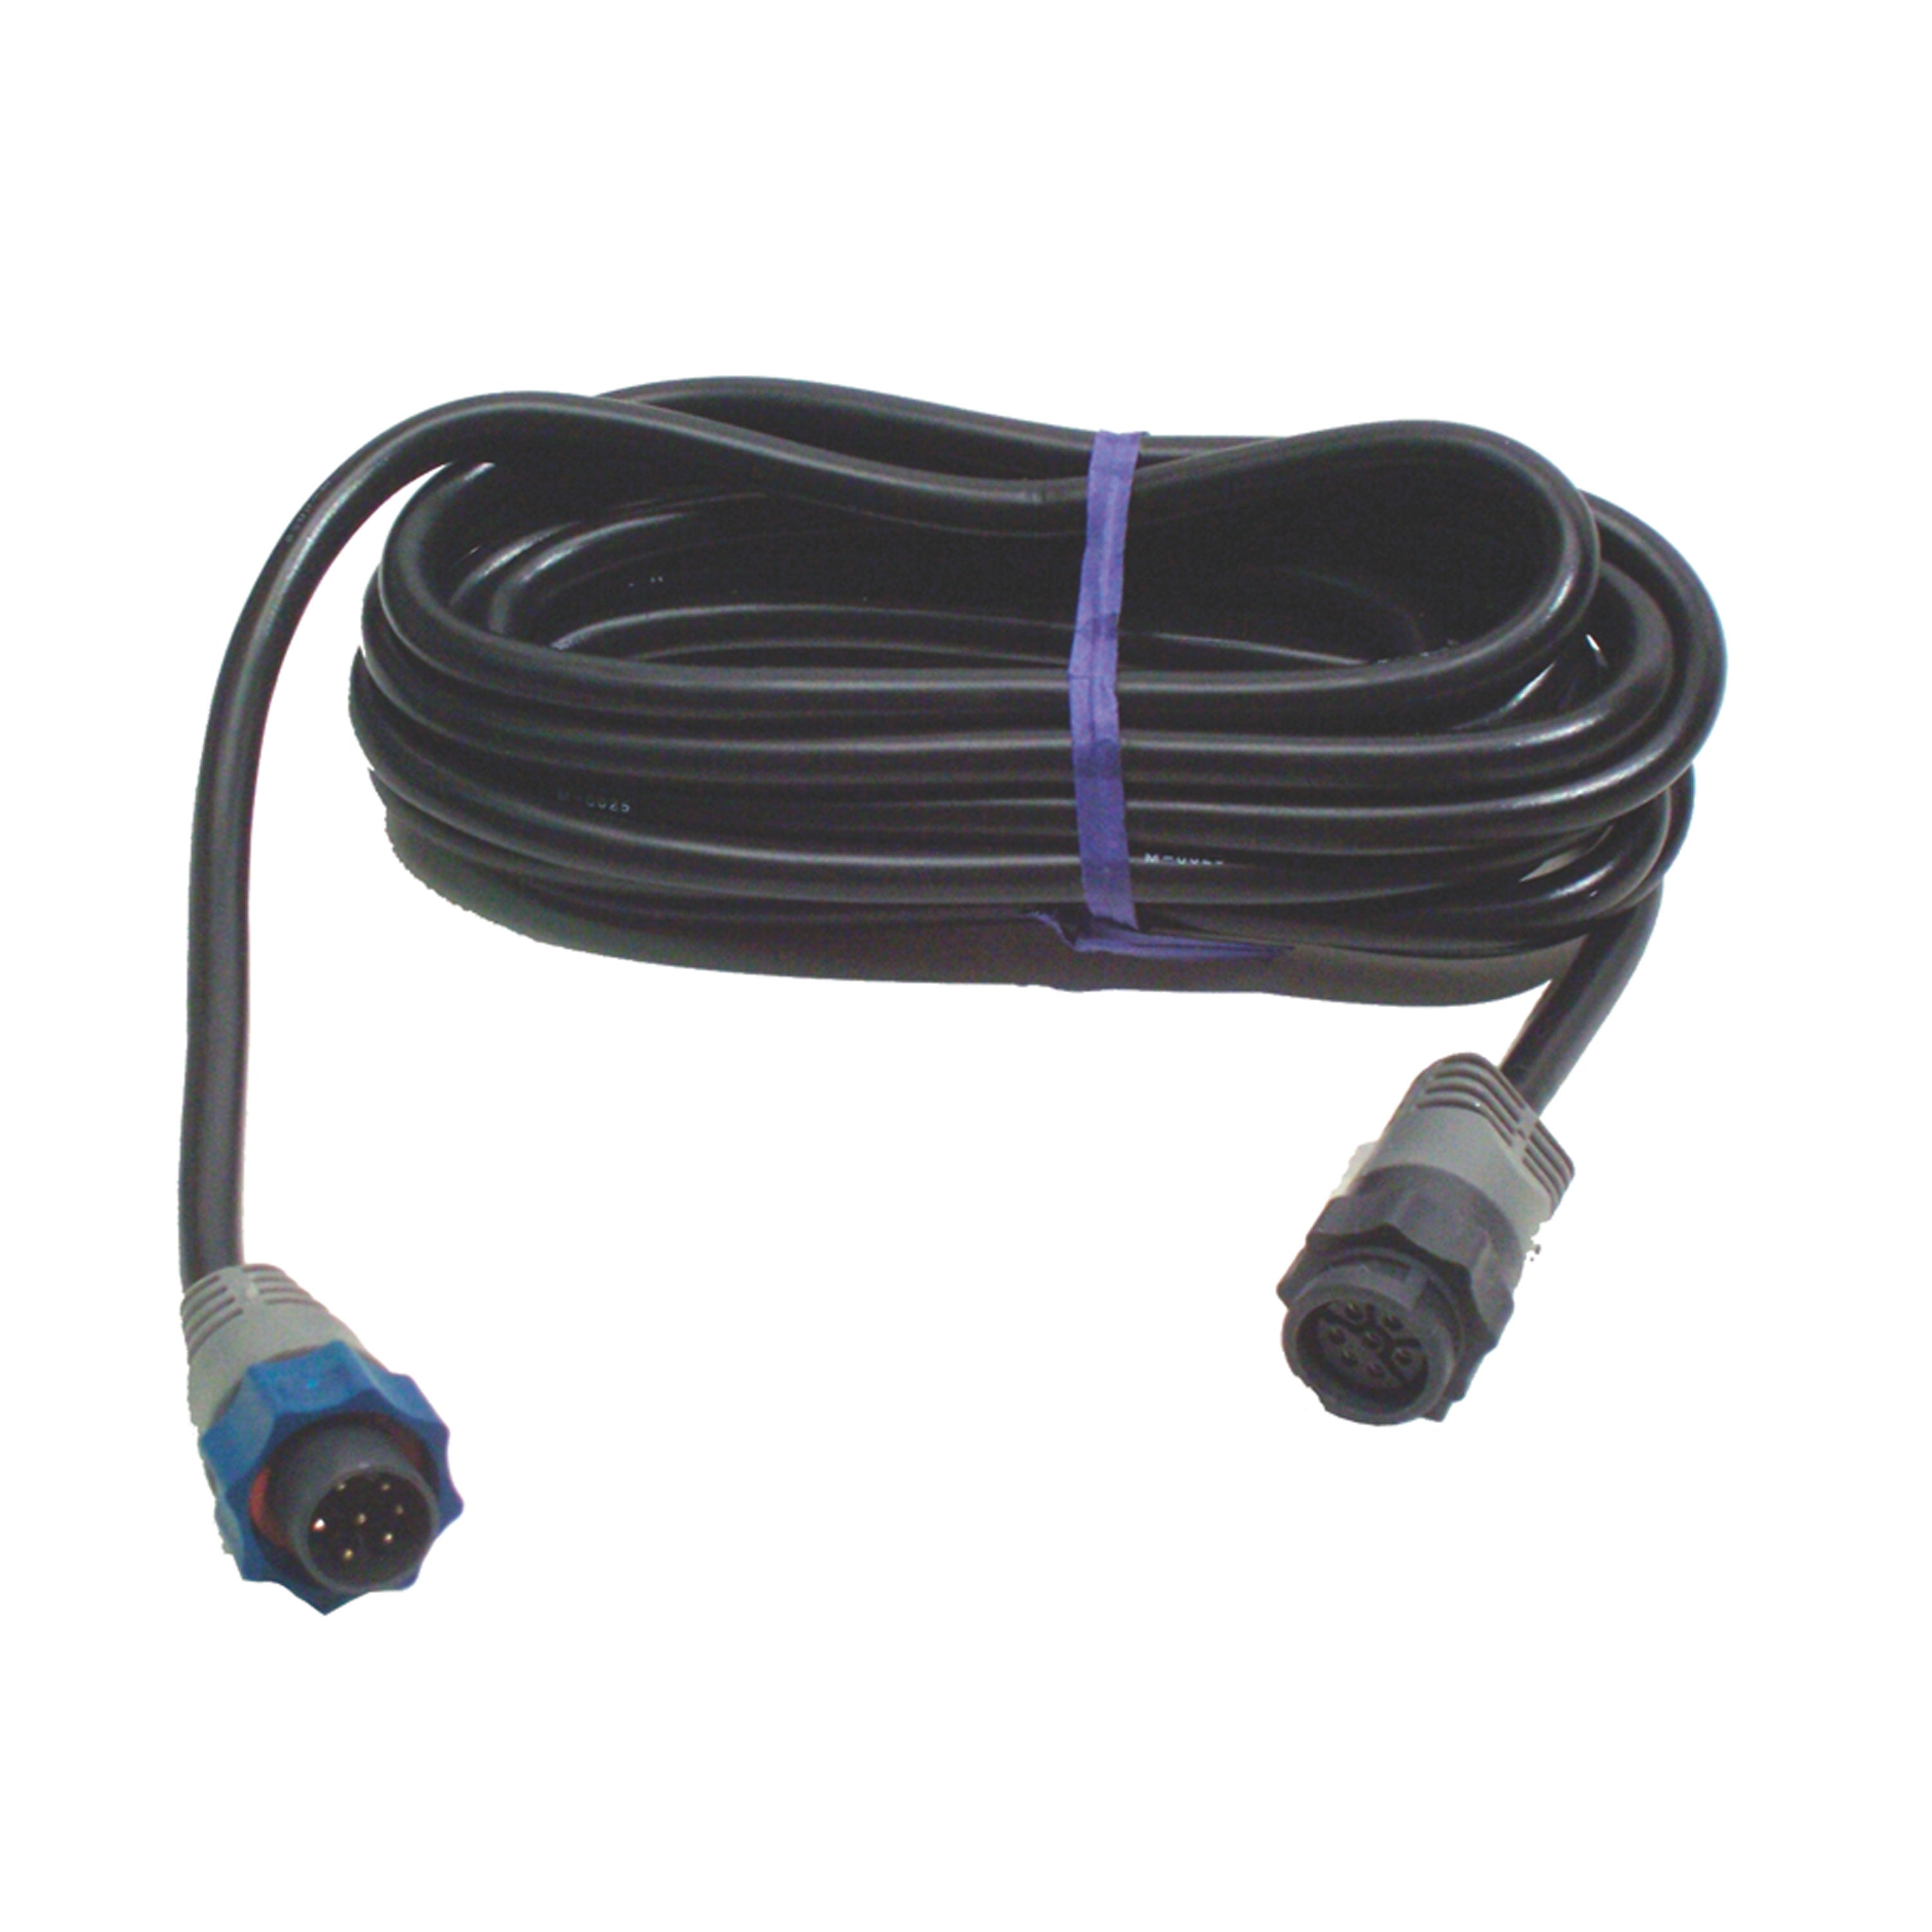 Lowrance 000-0099-93 Transducer Extension Cables